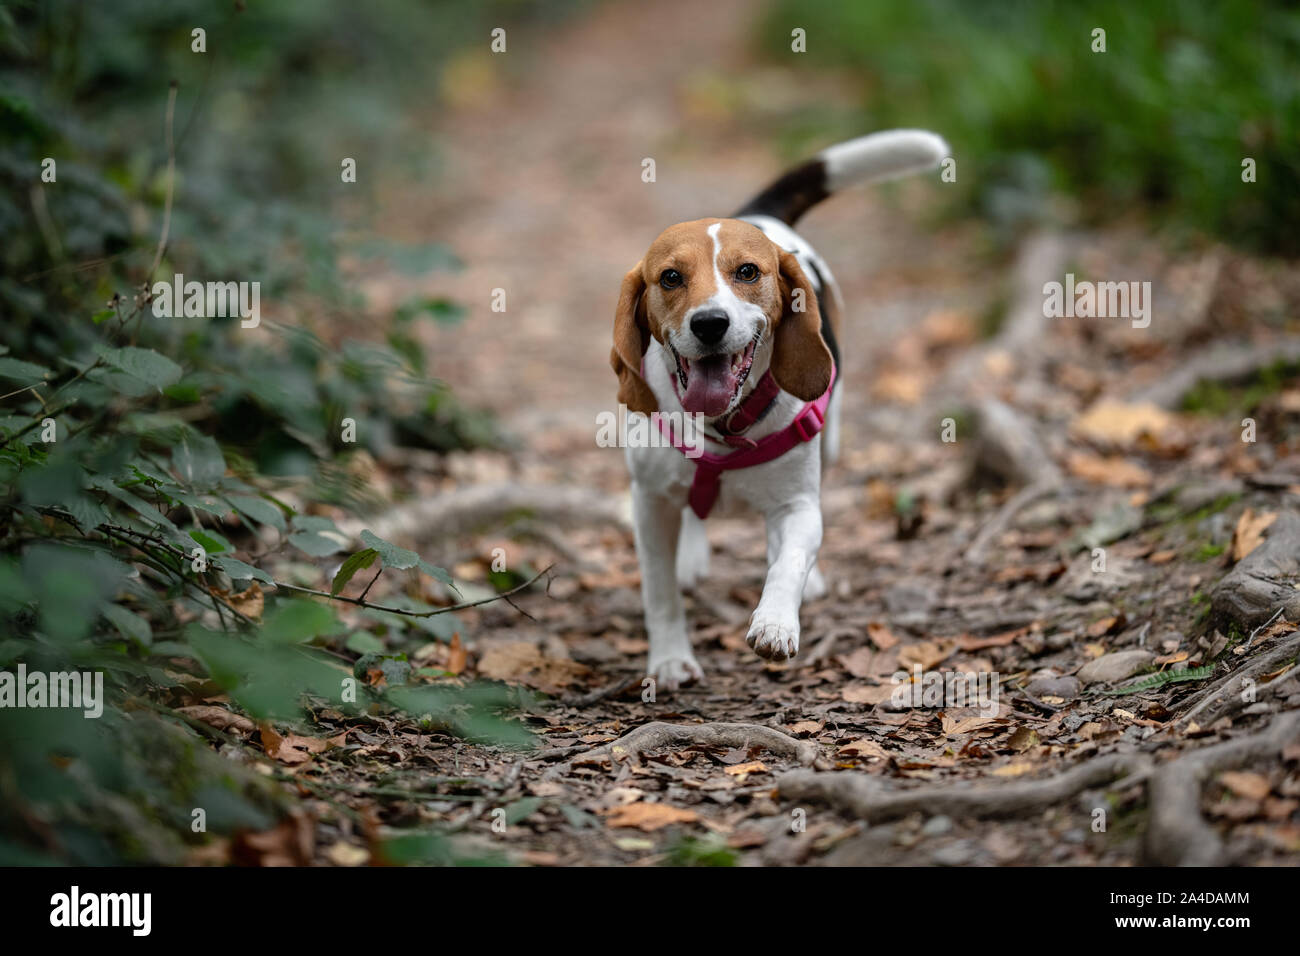 Dog walking along a footpath in the forest, Ireland Stock Photo